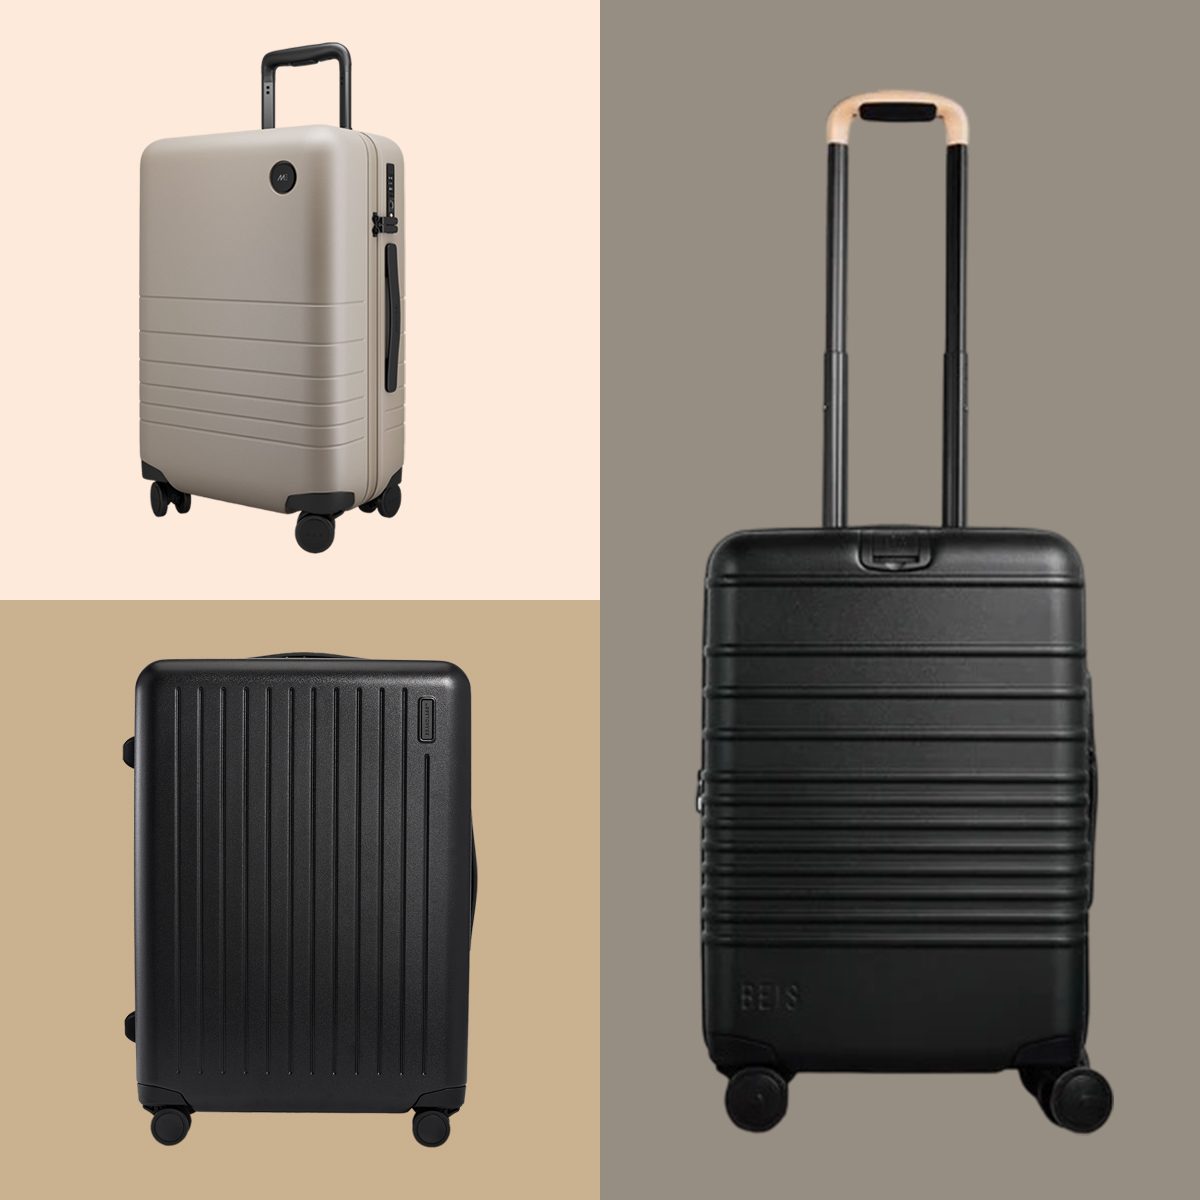 The 8 Best Luggage Sets Of 2023 According To Travel Experts1 FT Via Amazon.com  